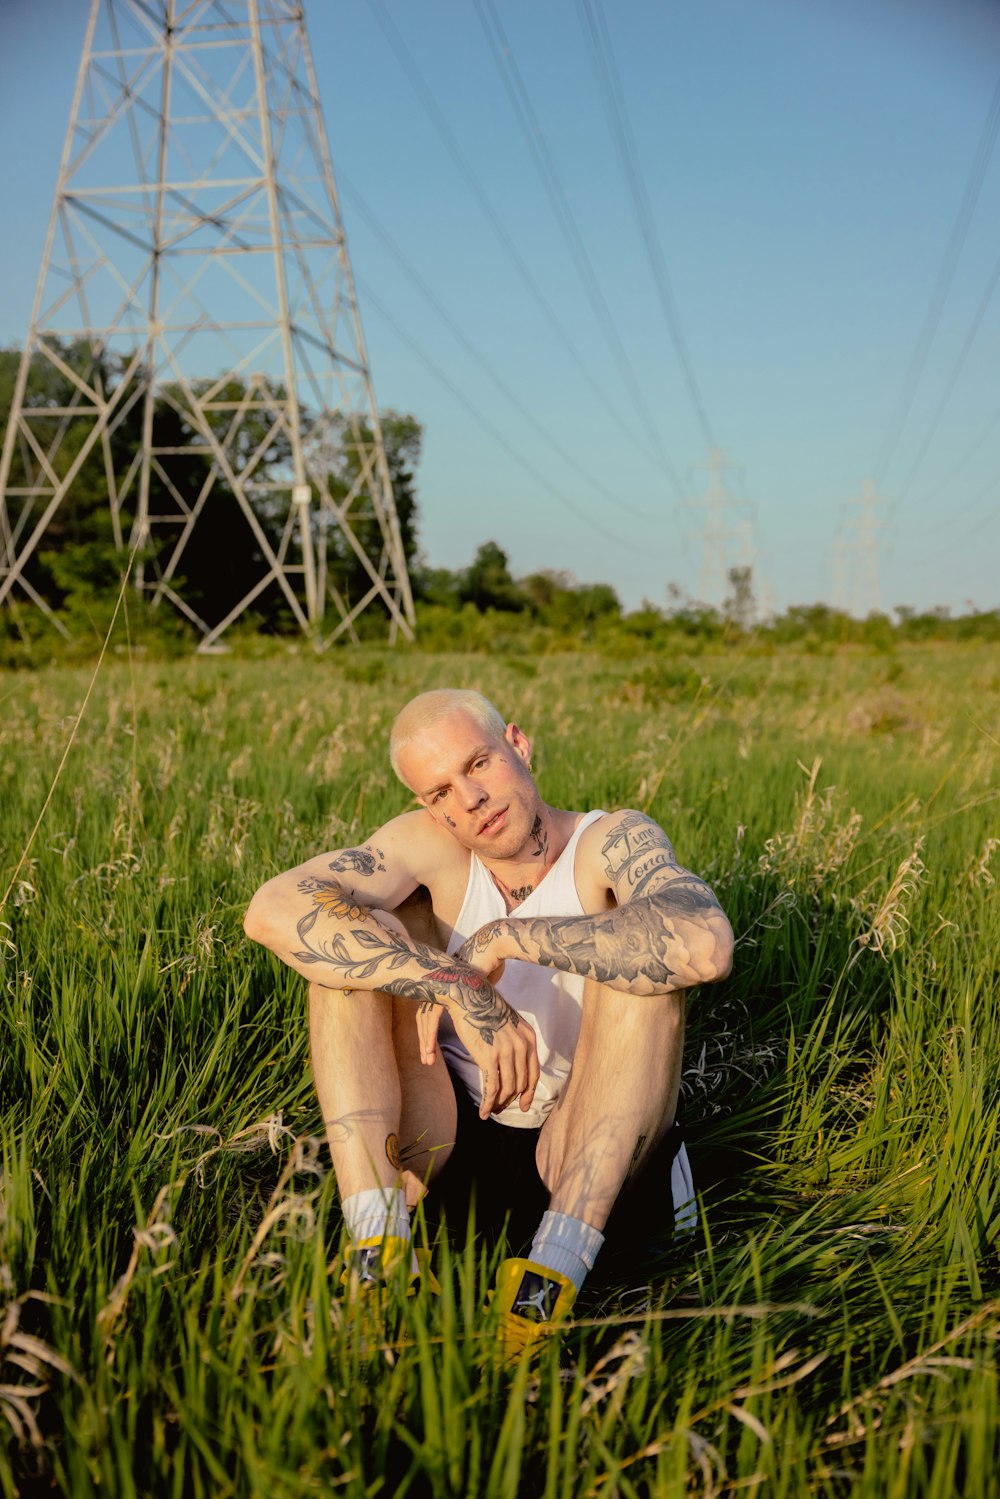 a man with tattoos sitting in a field